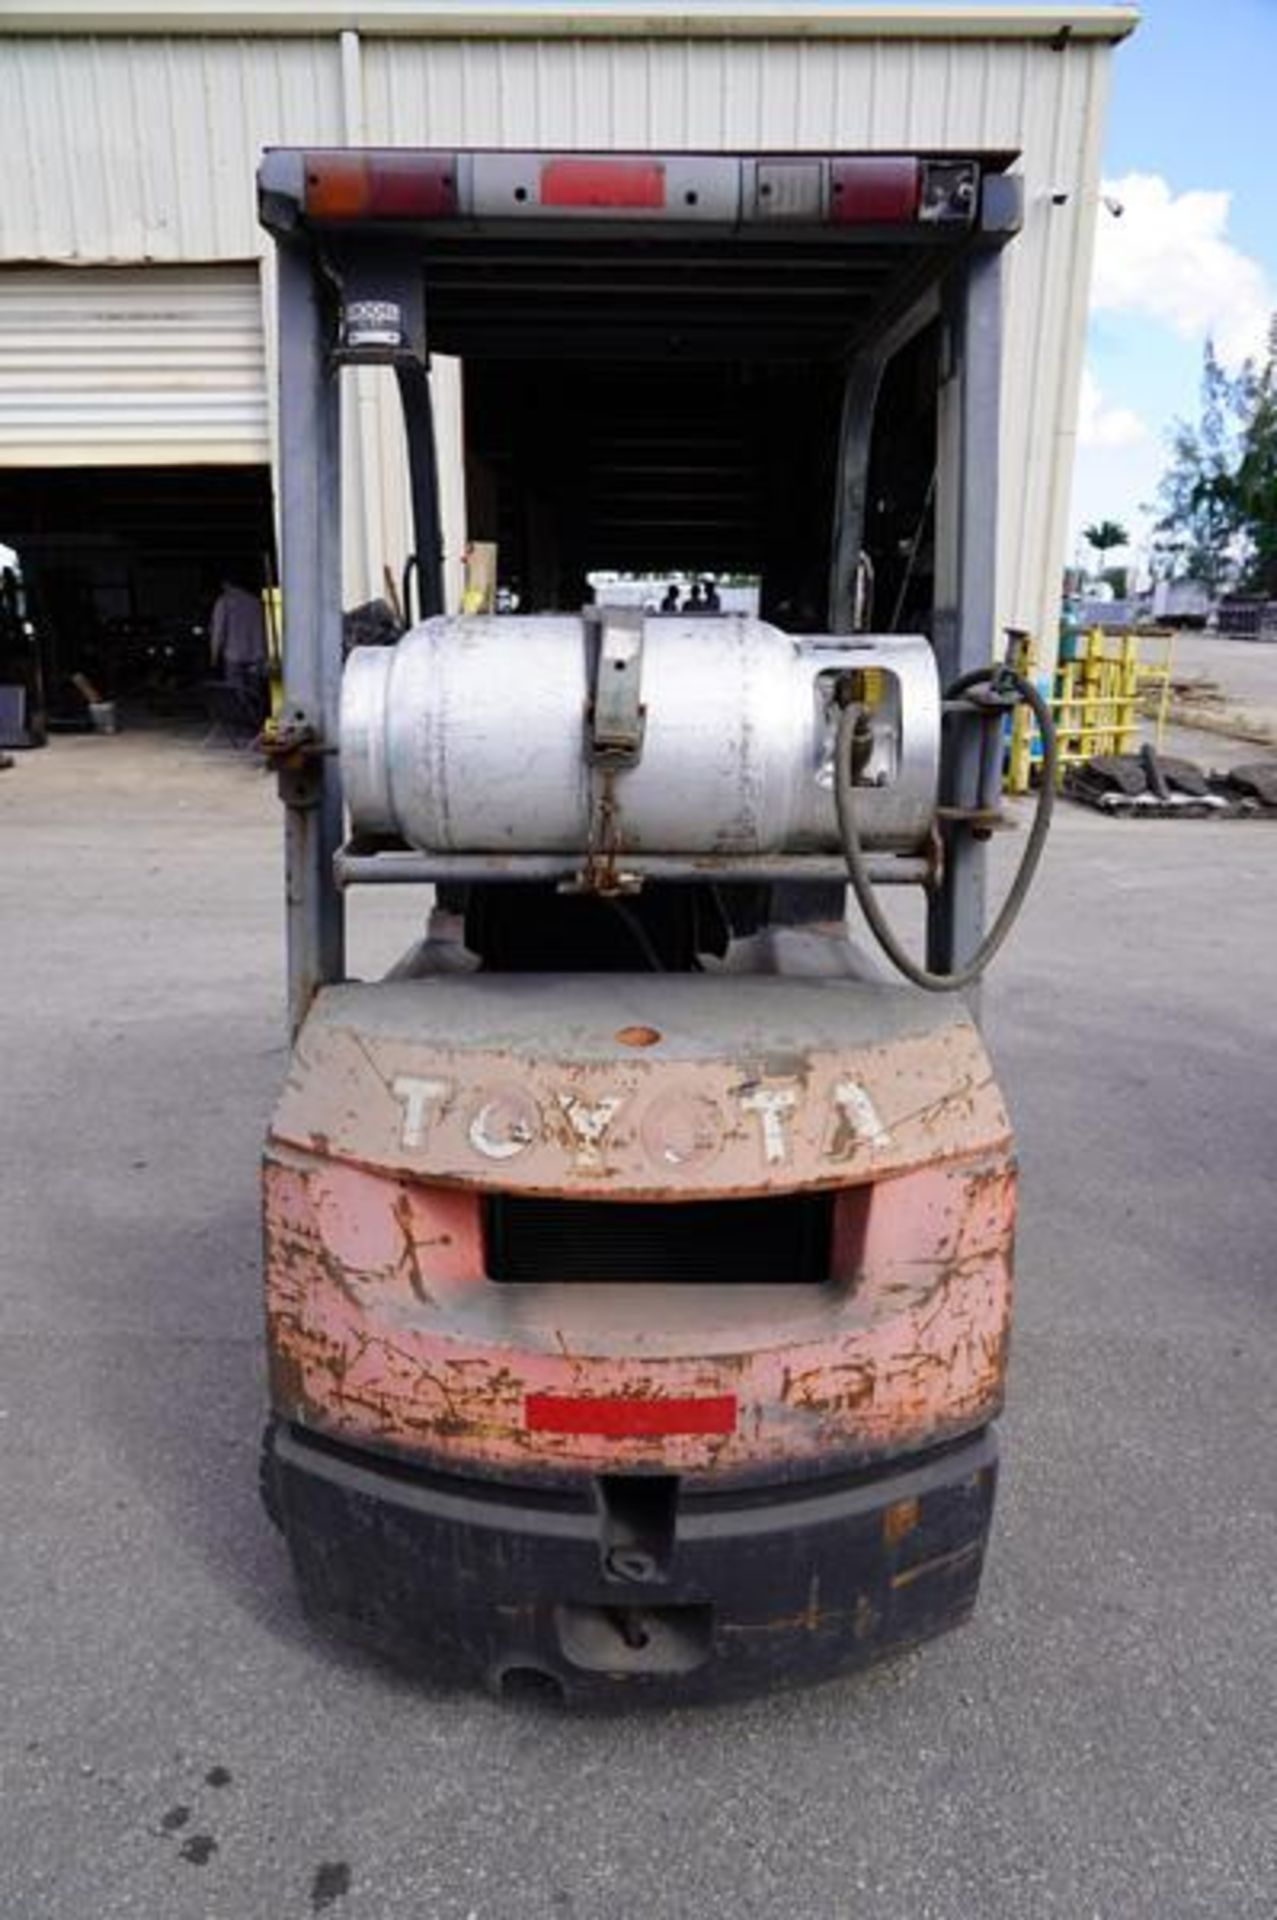 Toyota Mdl: 7FGU18 3,500 Lbs Propane Forklift, 3,500 Lbs Lift Capacity, Load Center 24'', Lift Speed - Image 5 of 10